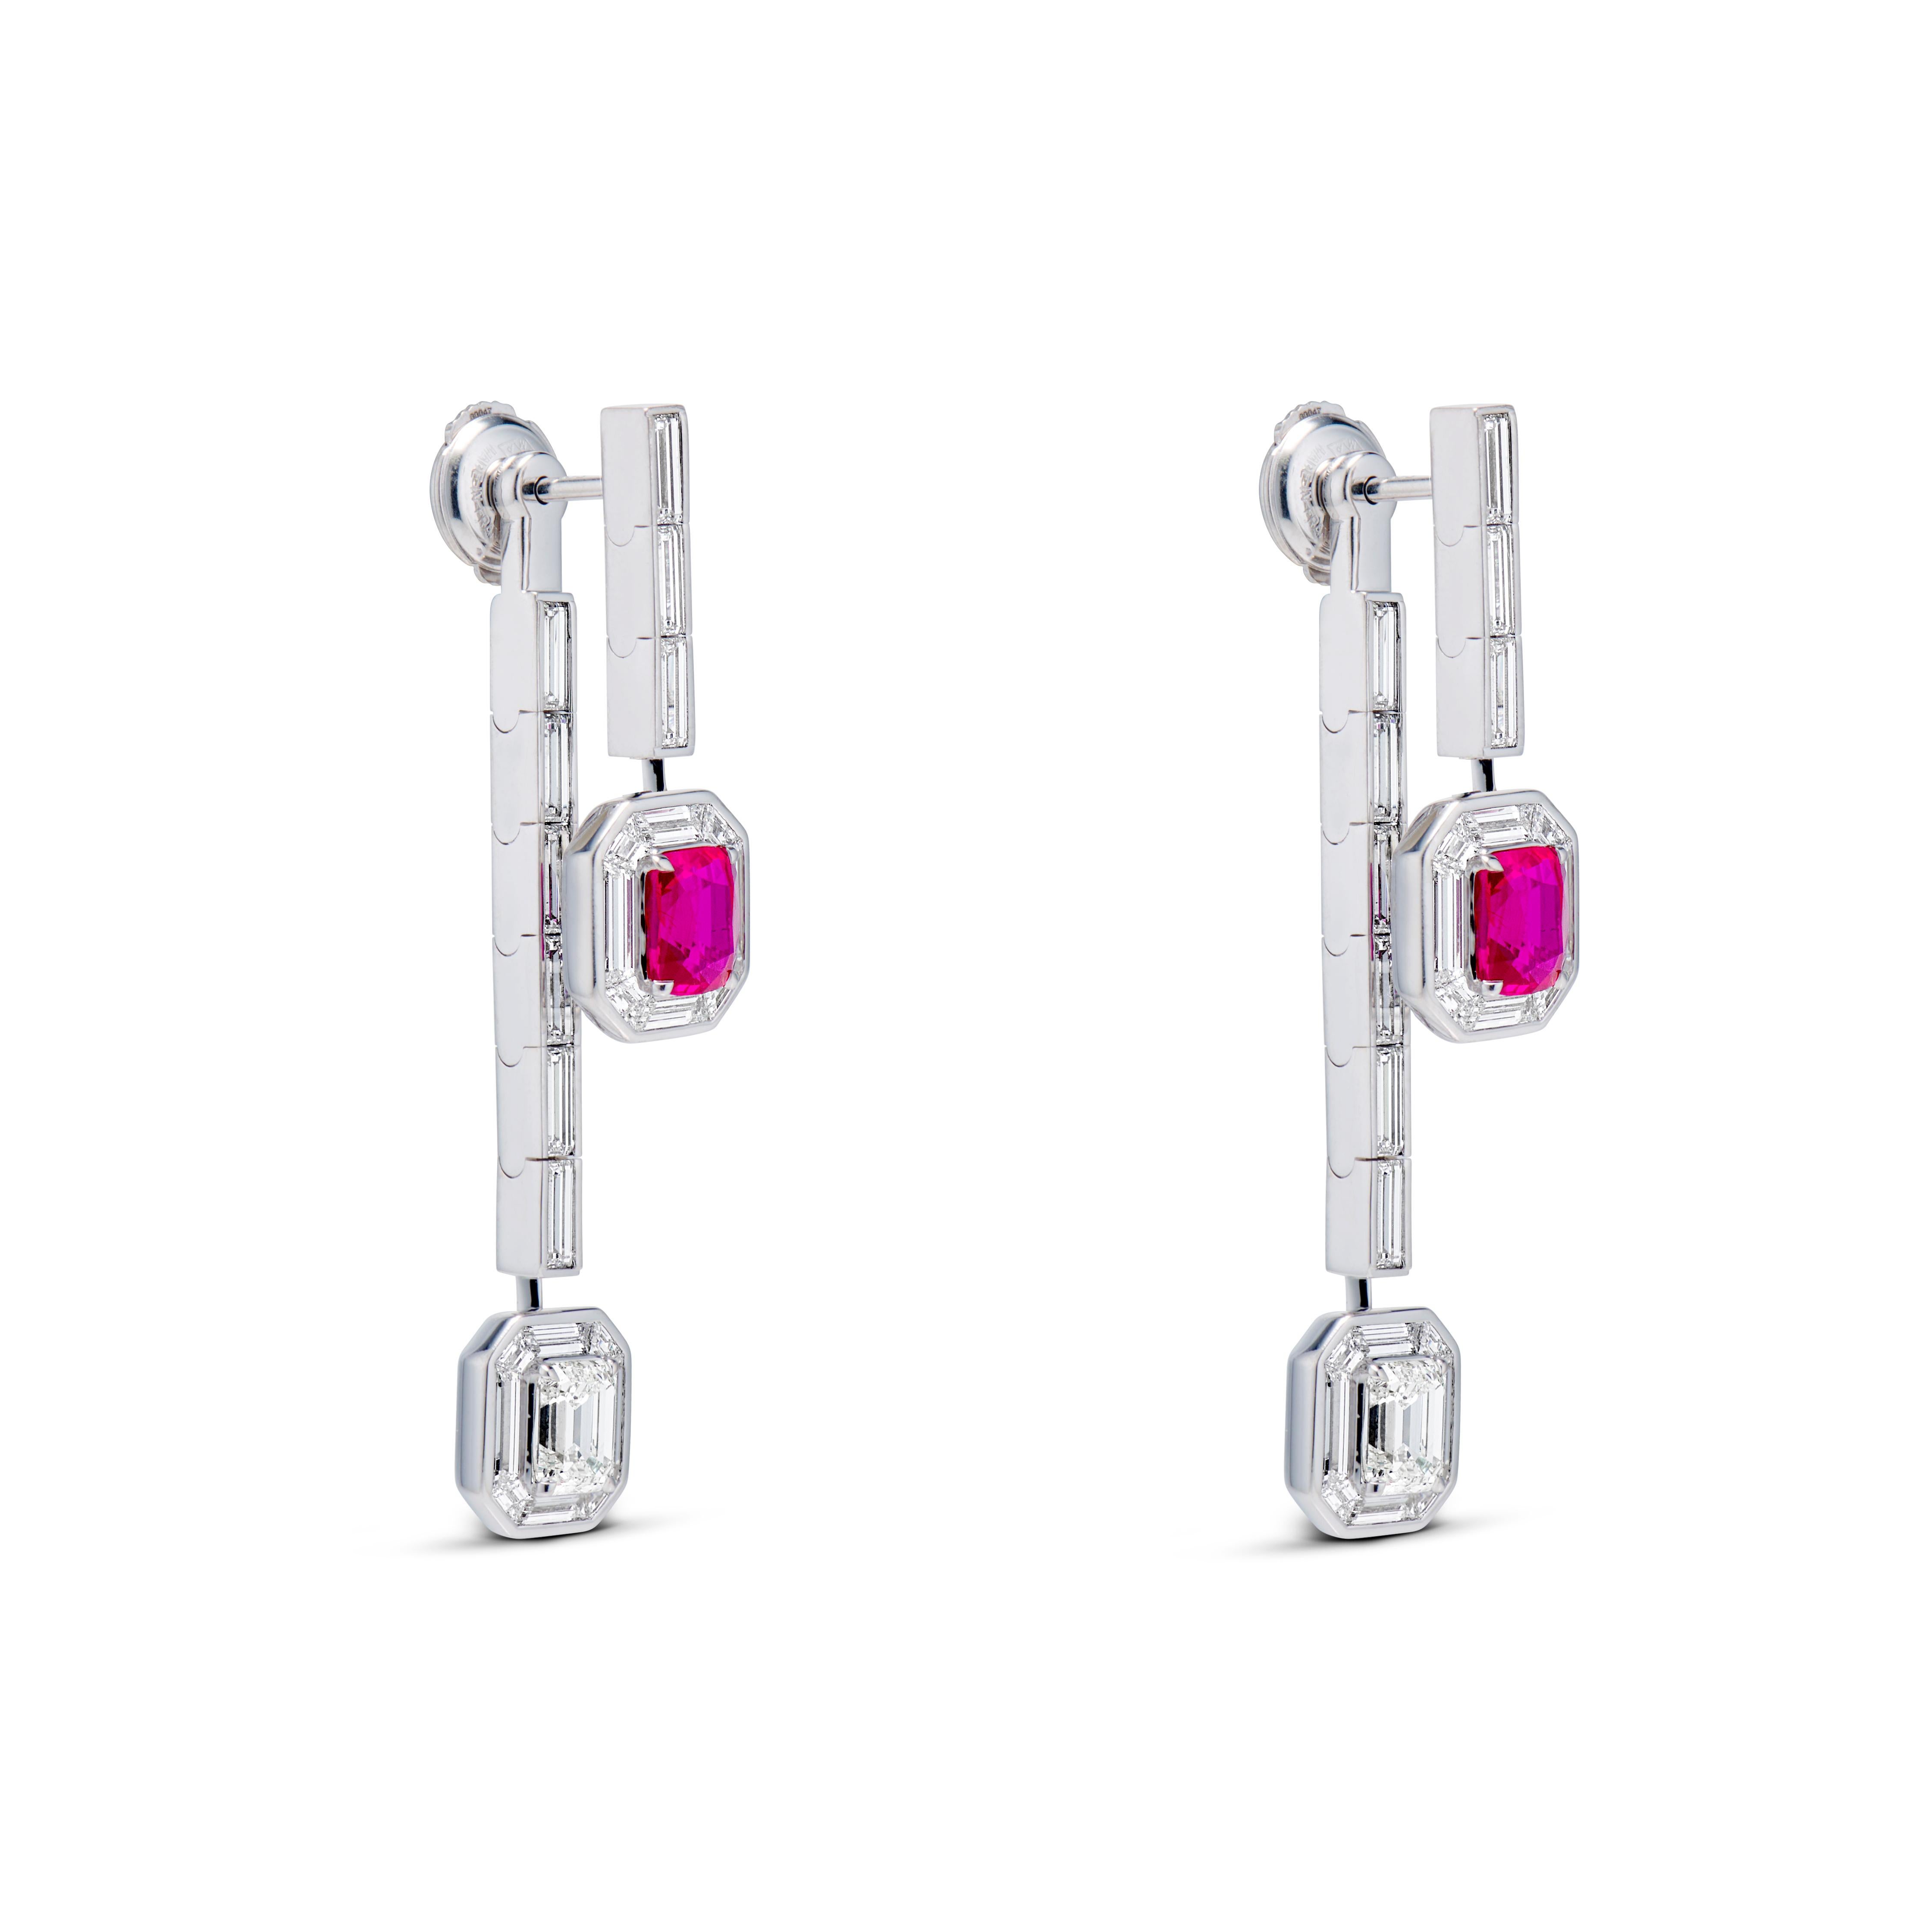 From the Passion & Strength collection, the Ruby & Diamond Earrings are refined and versatile. 
They feature a pair of Mozambican no-heat rubies ensconced in a regal halo of custom-cut baguette diamonds. The ear jackets are emerald-cut diamonds